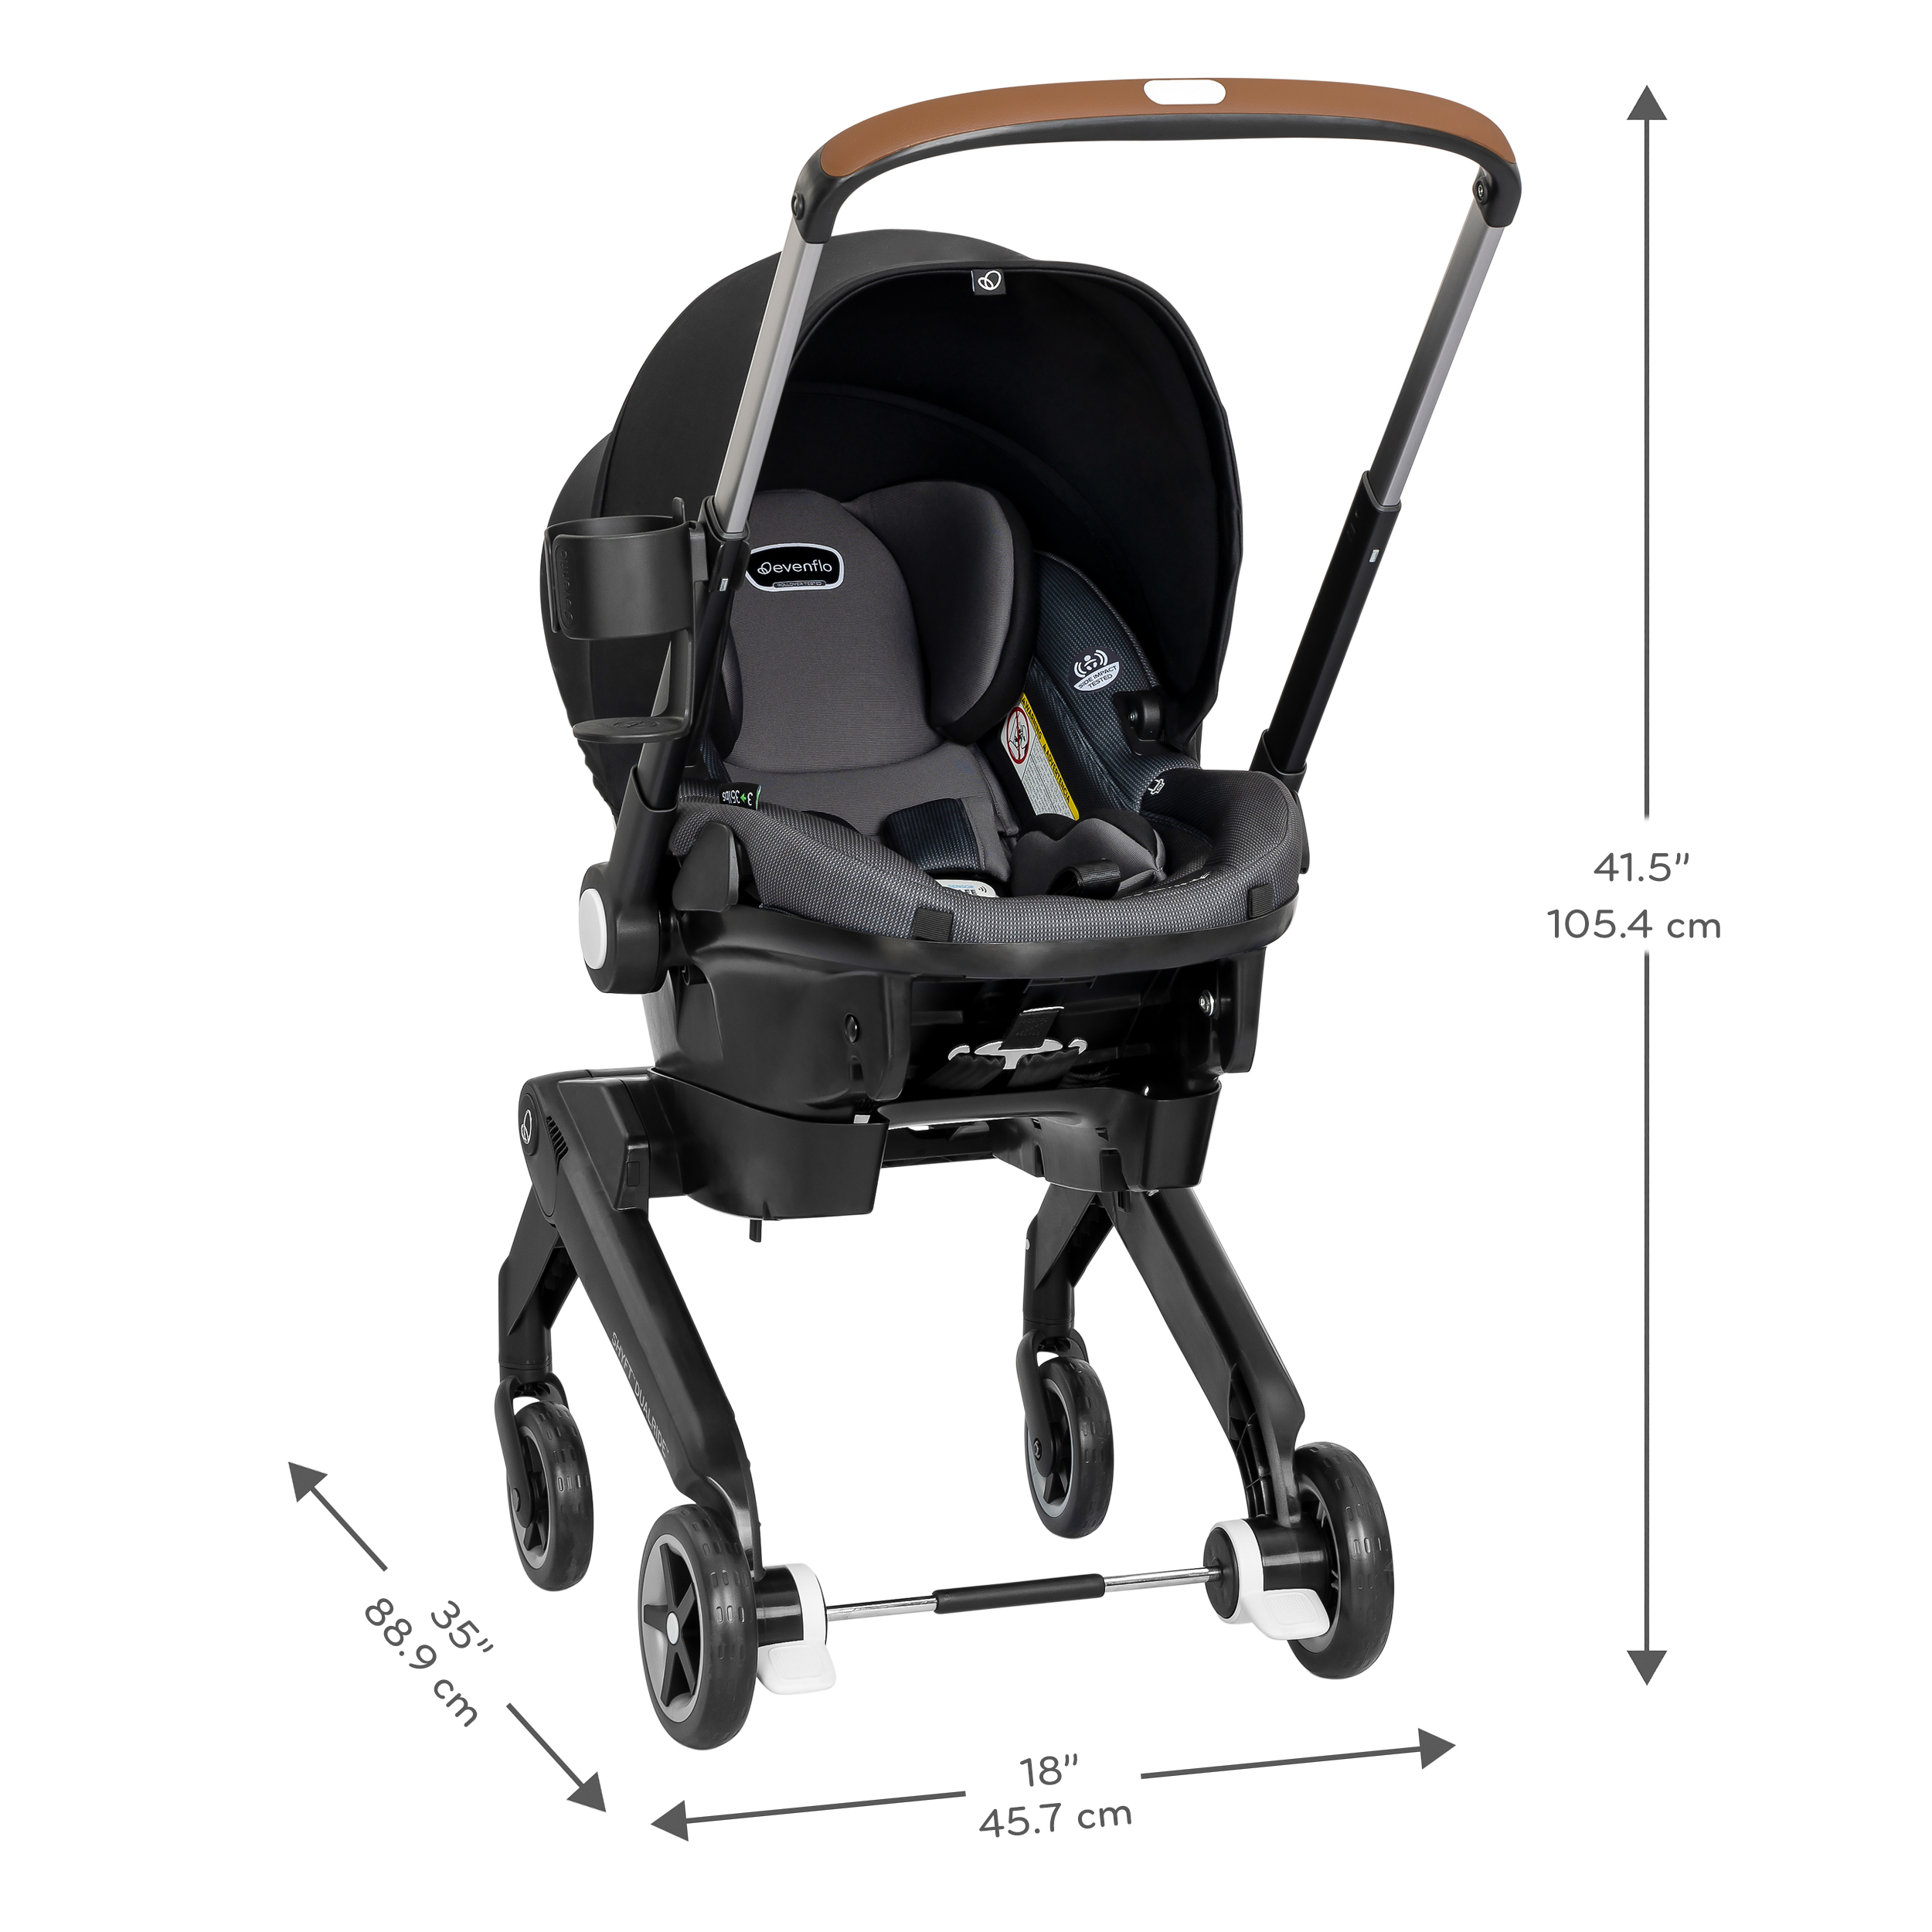 Shyft DualRide with Carryall Storage Infant Car Seat and Stroller Combo Specifications